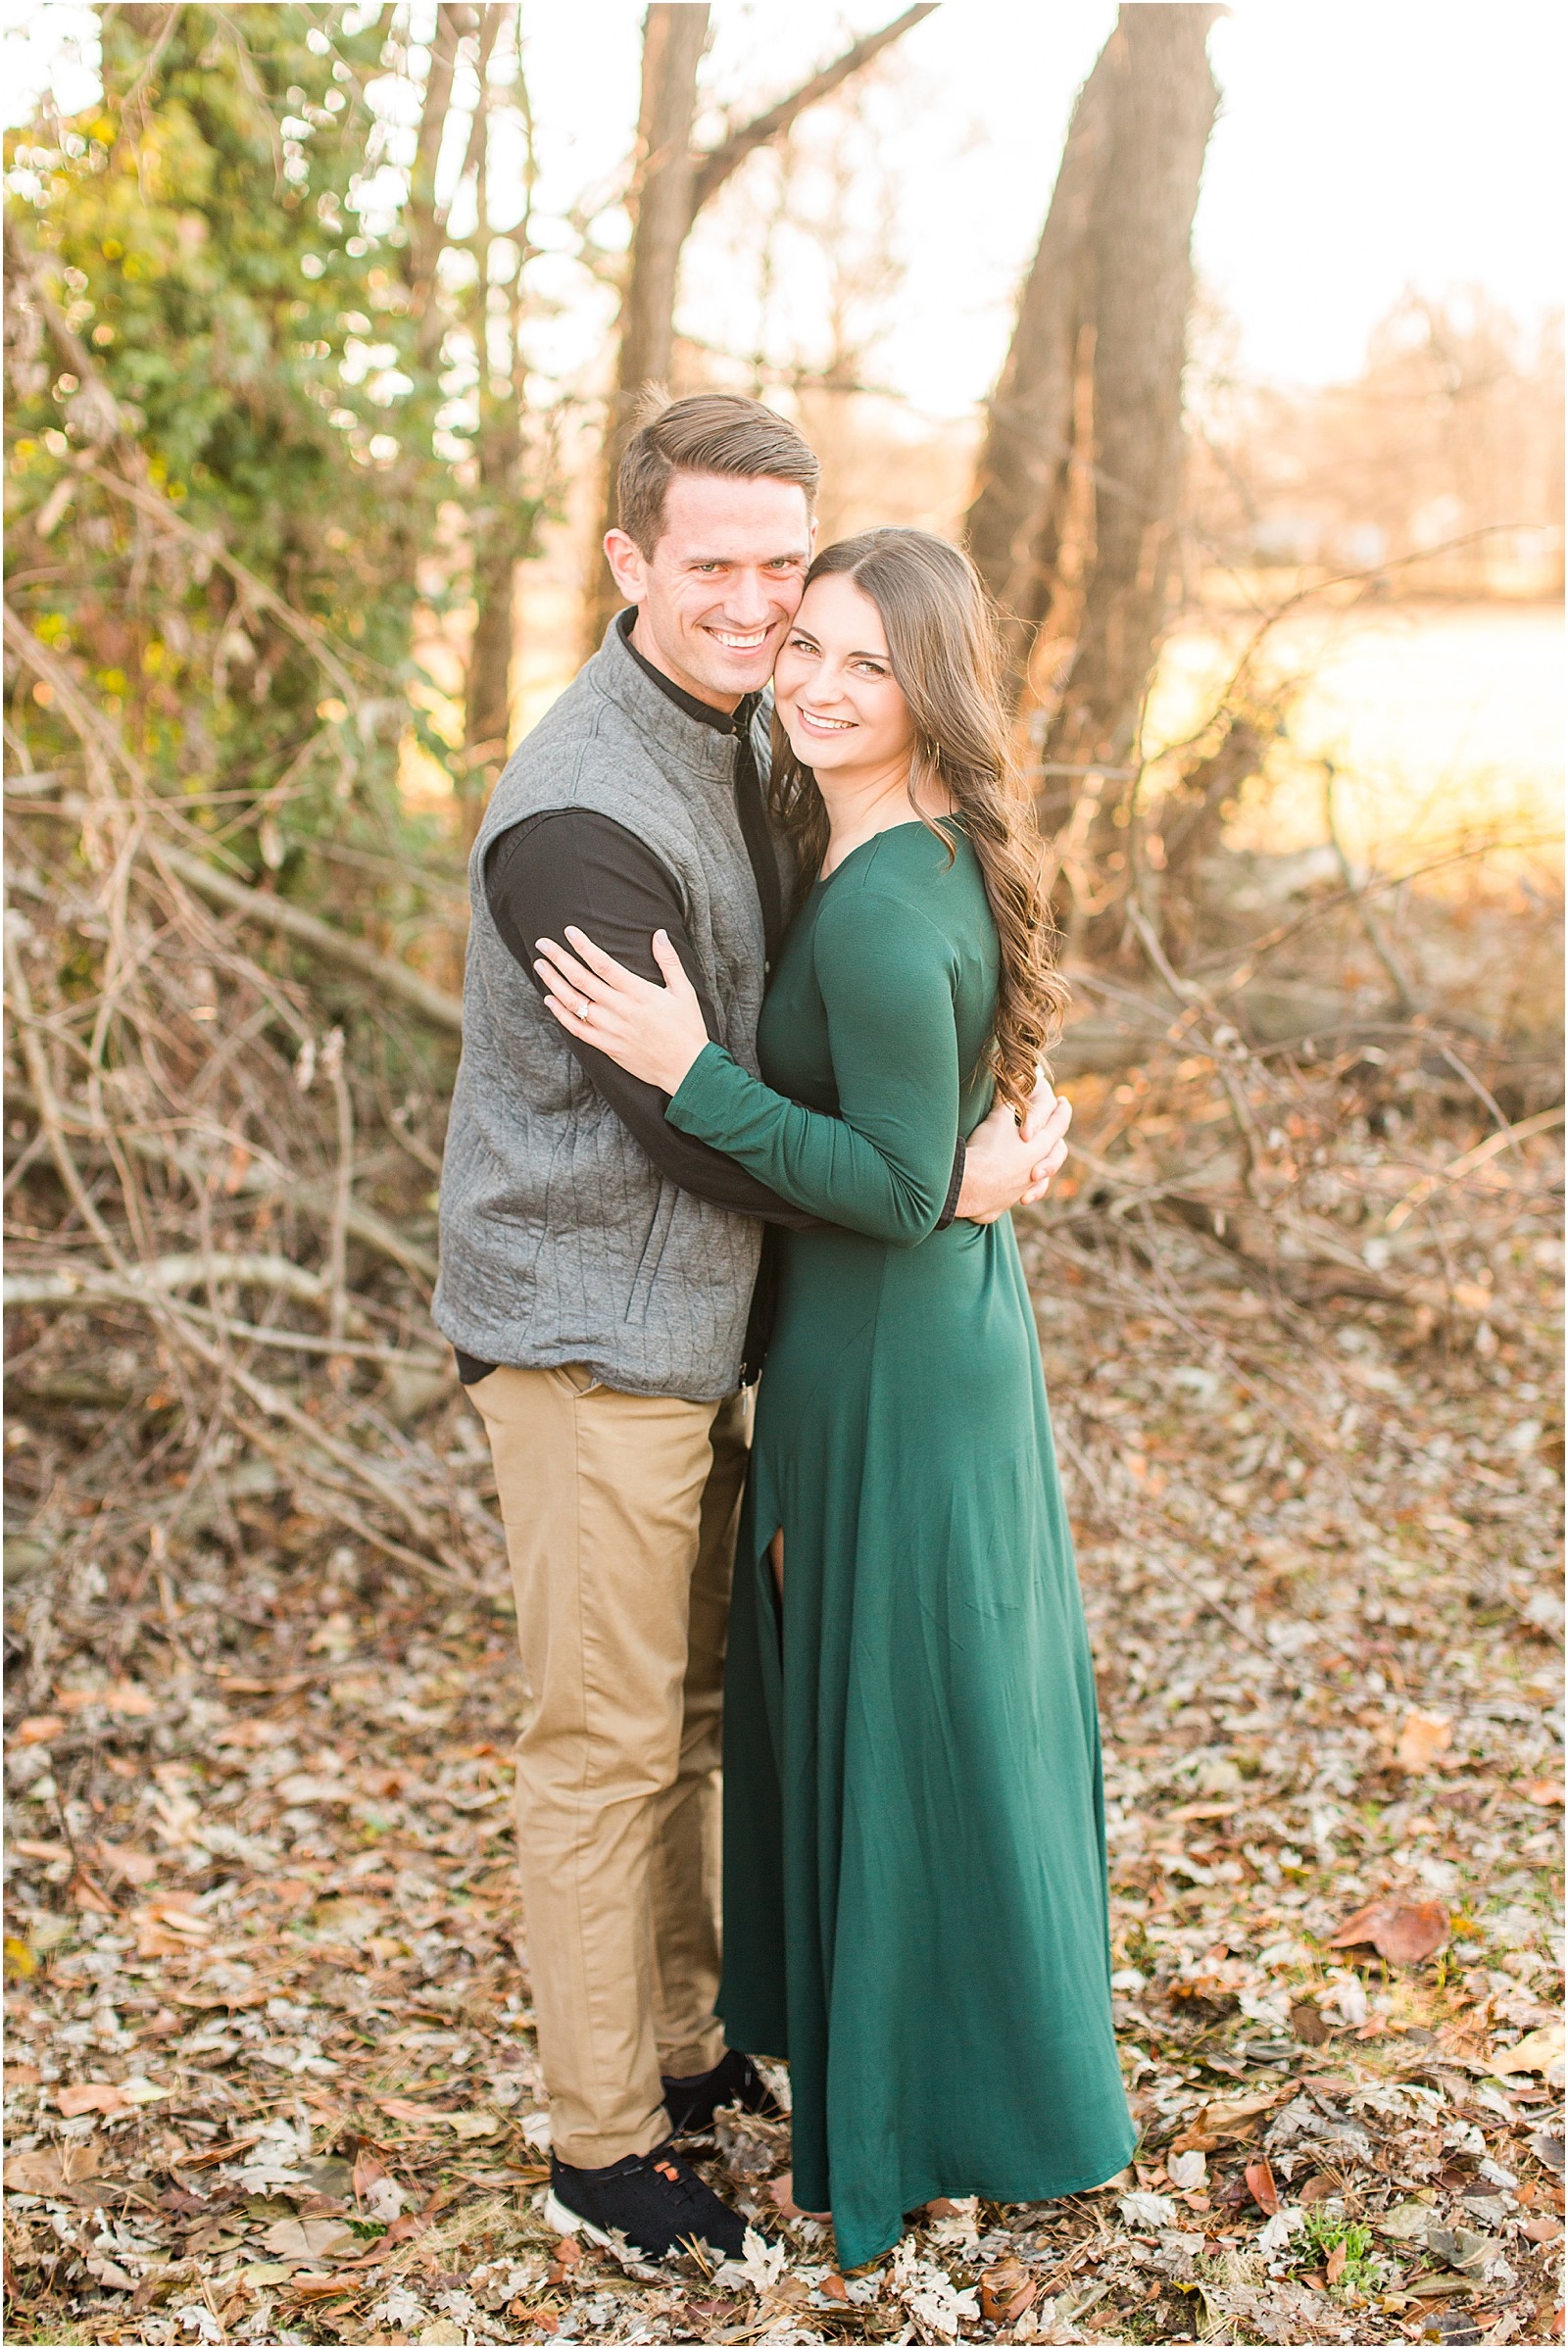 Kaley and Devon's fall Evansville Indiana engagement session. | #fallengagementsession #evansvilleindiana #evansvilleindianawedding | 0010.jpg